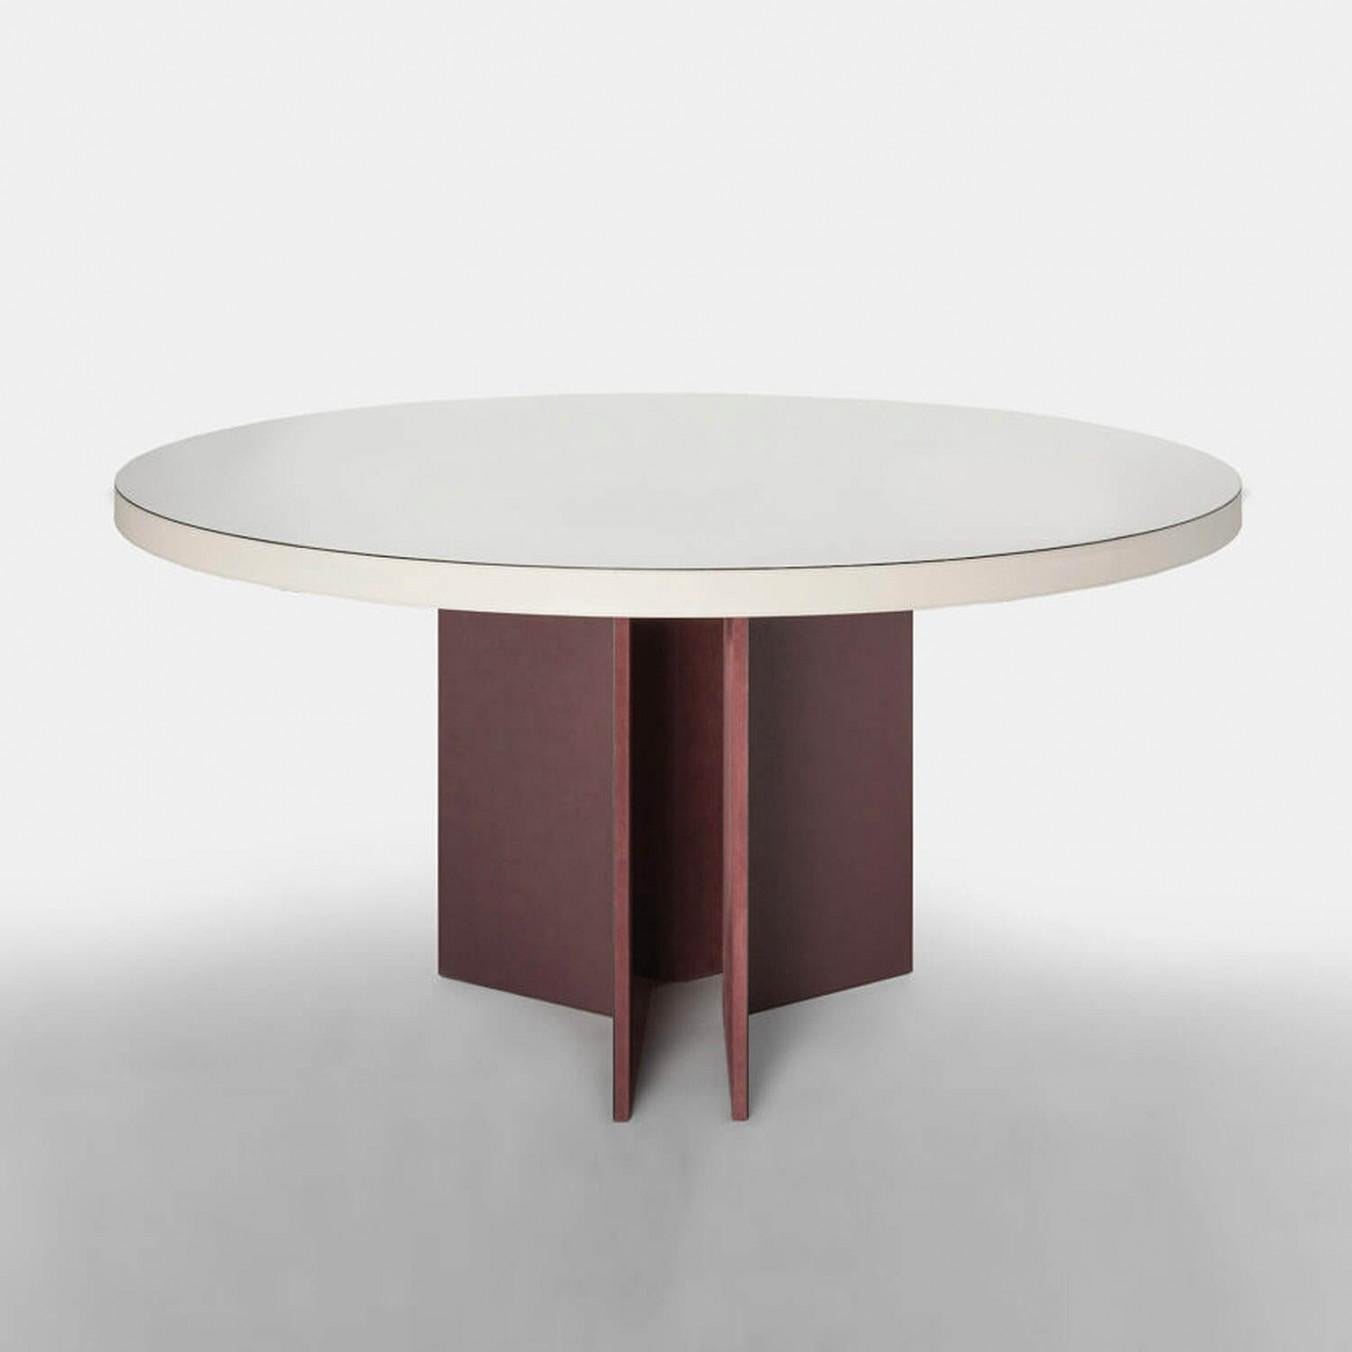 Contemporary round leather dining table - Bivio by Stephane Parmentier for Giobagnara.
The object presented in the image has following finish: A05 White Suede Leather and A17 Bordeaux Suede Leather.

A superb expression of creativity and